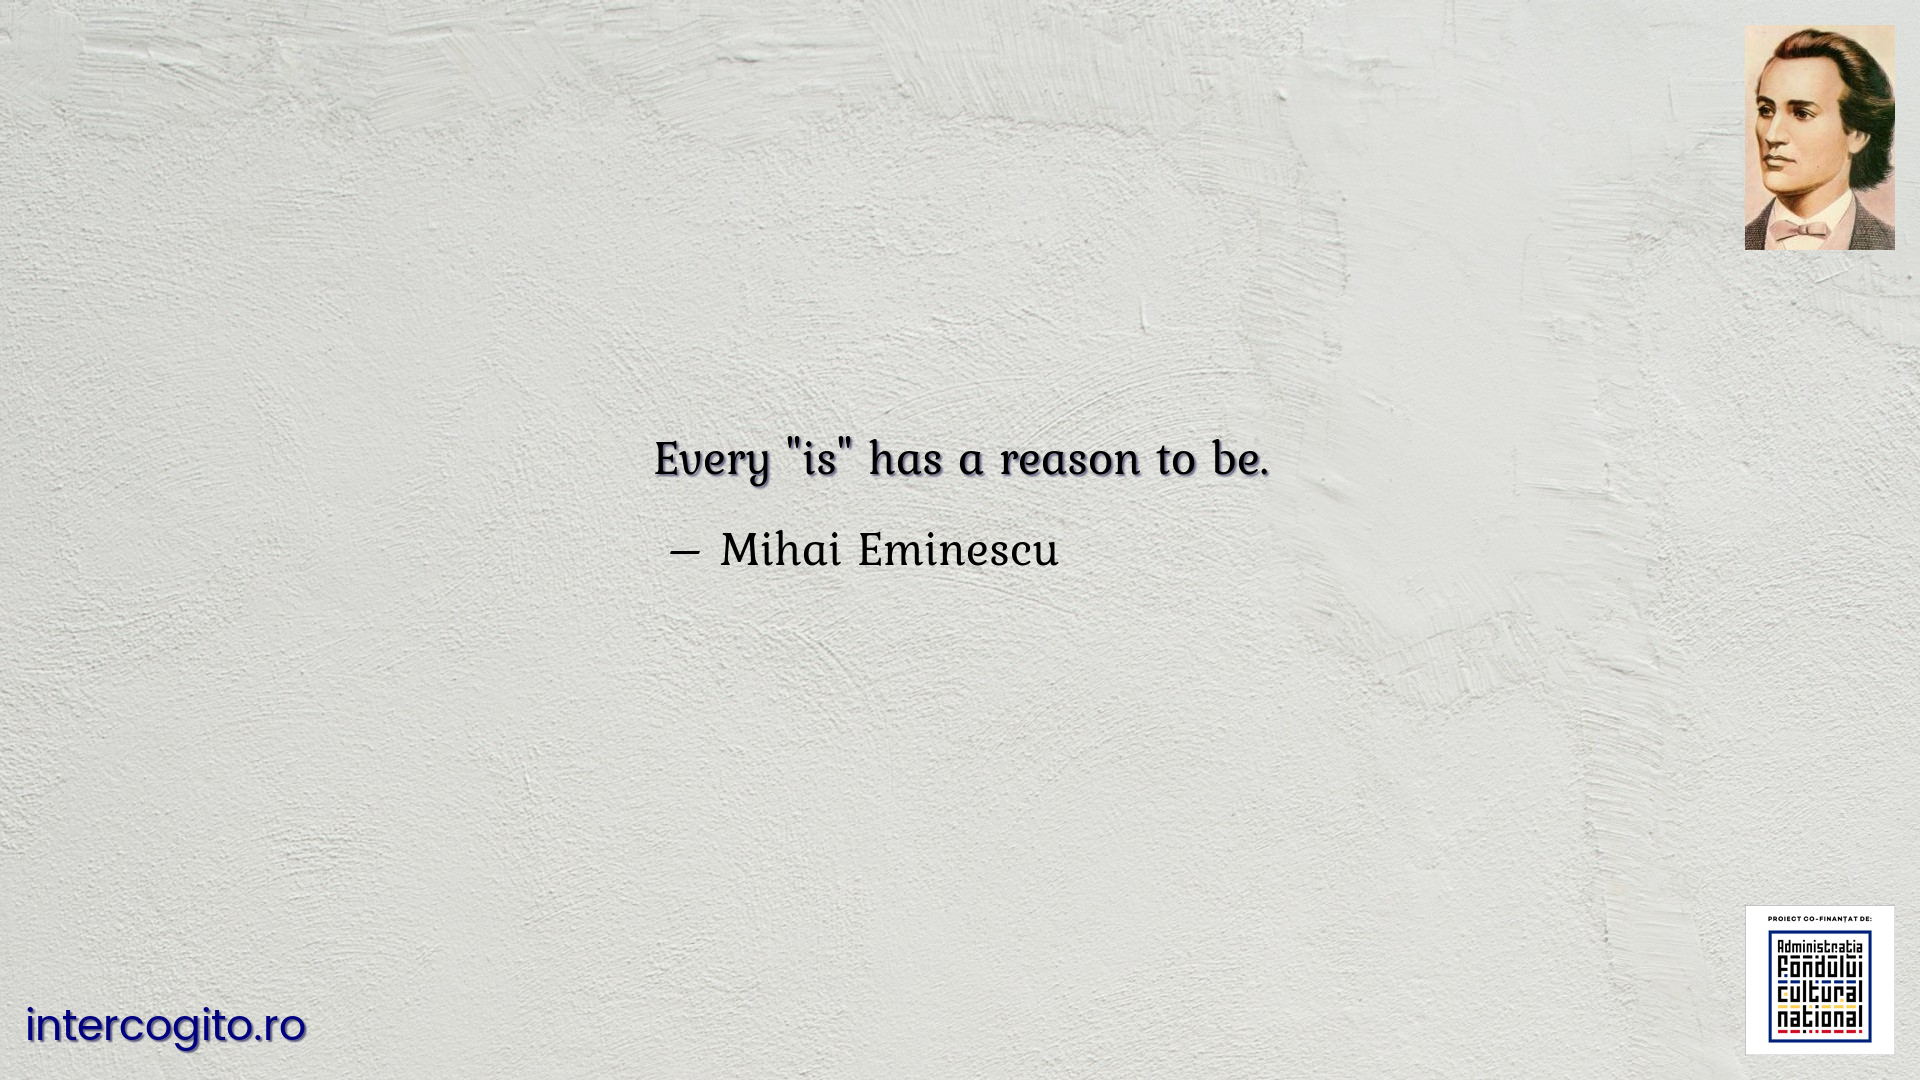 Every "is" has a reason to be.